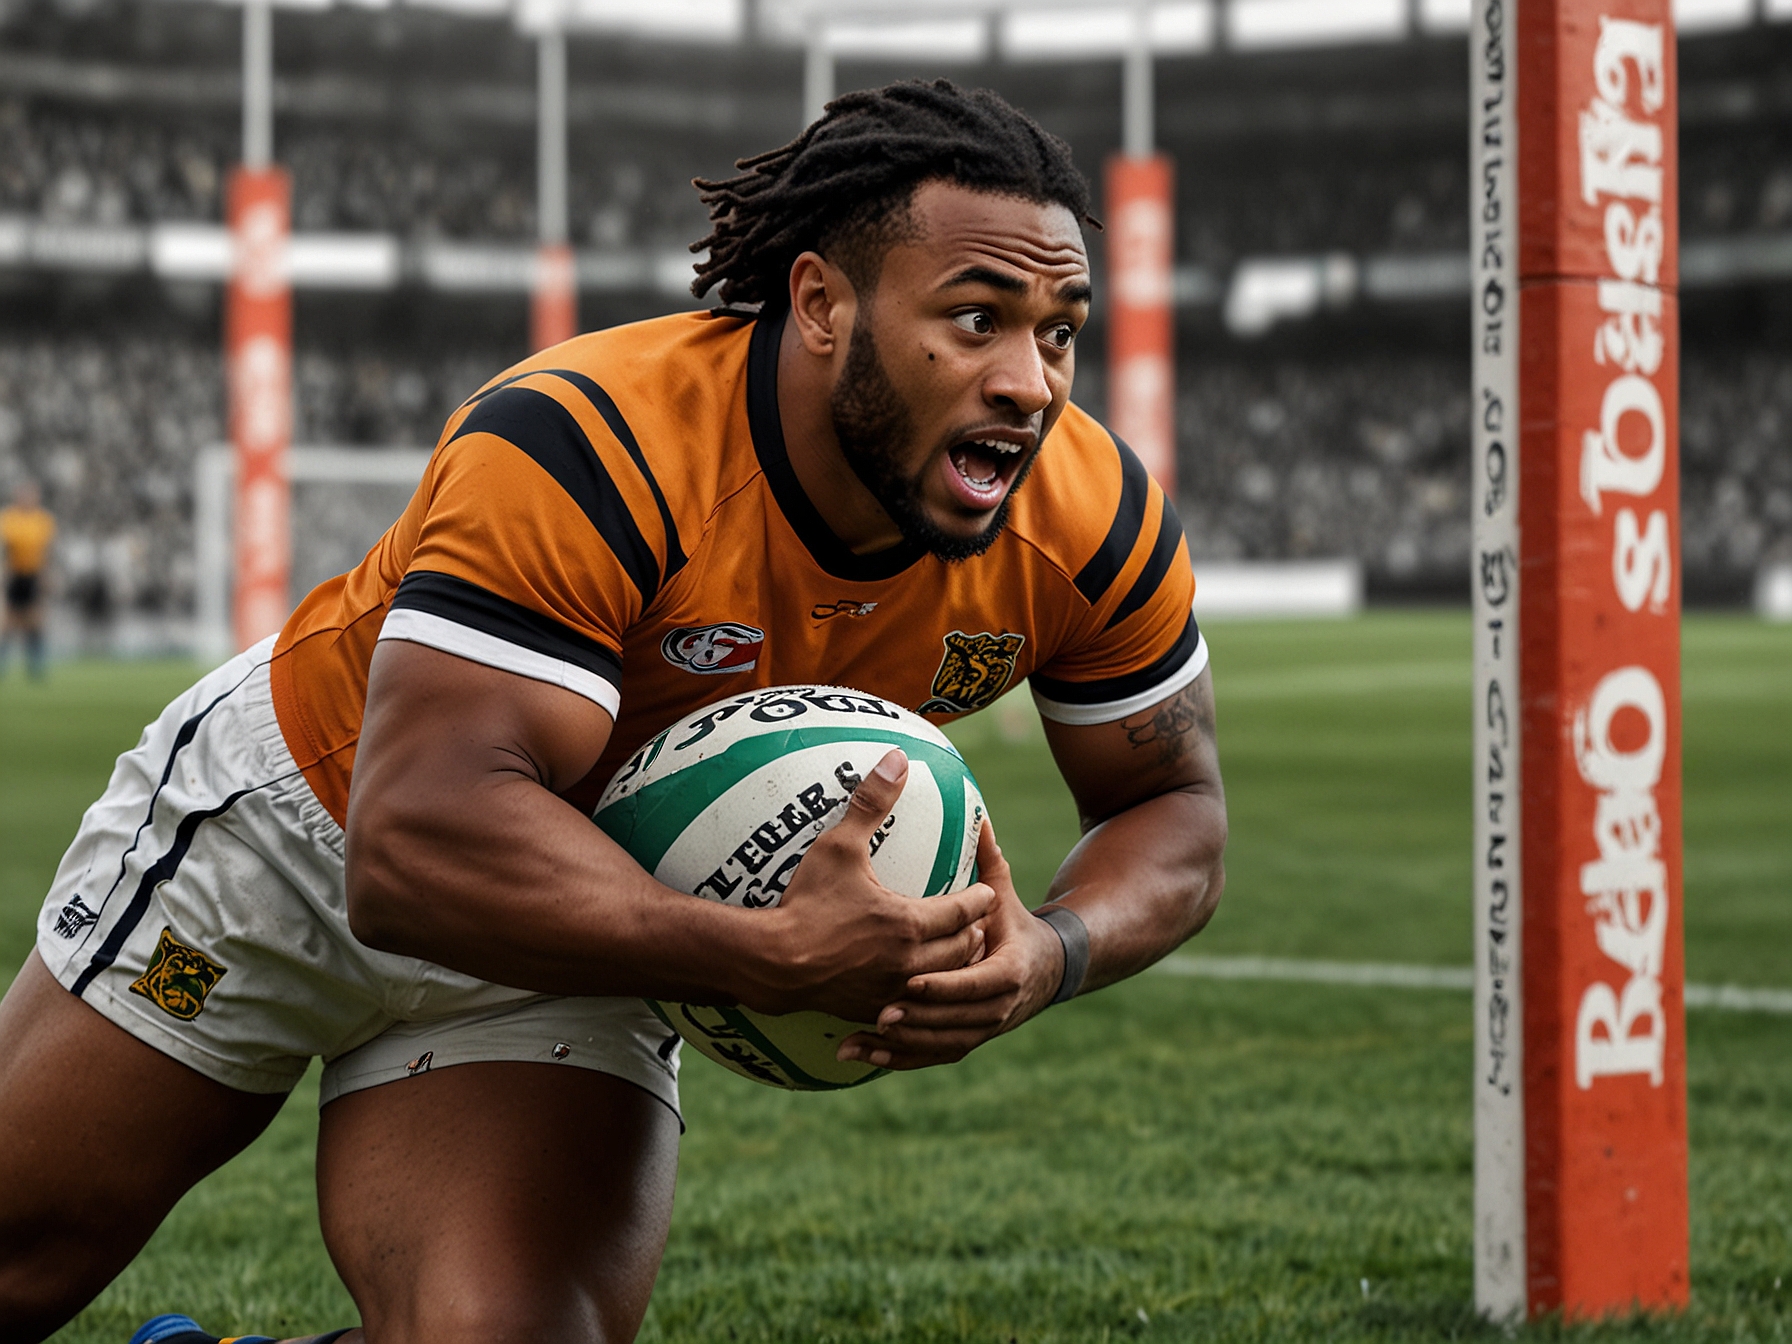 Jahream Bula of the Tigers scoring a crucial try under the posts, seizing the opportunity from Rapana's error and changing the momentum of the rugby match.